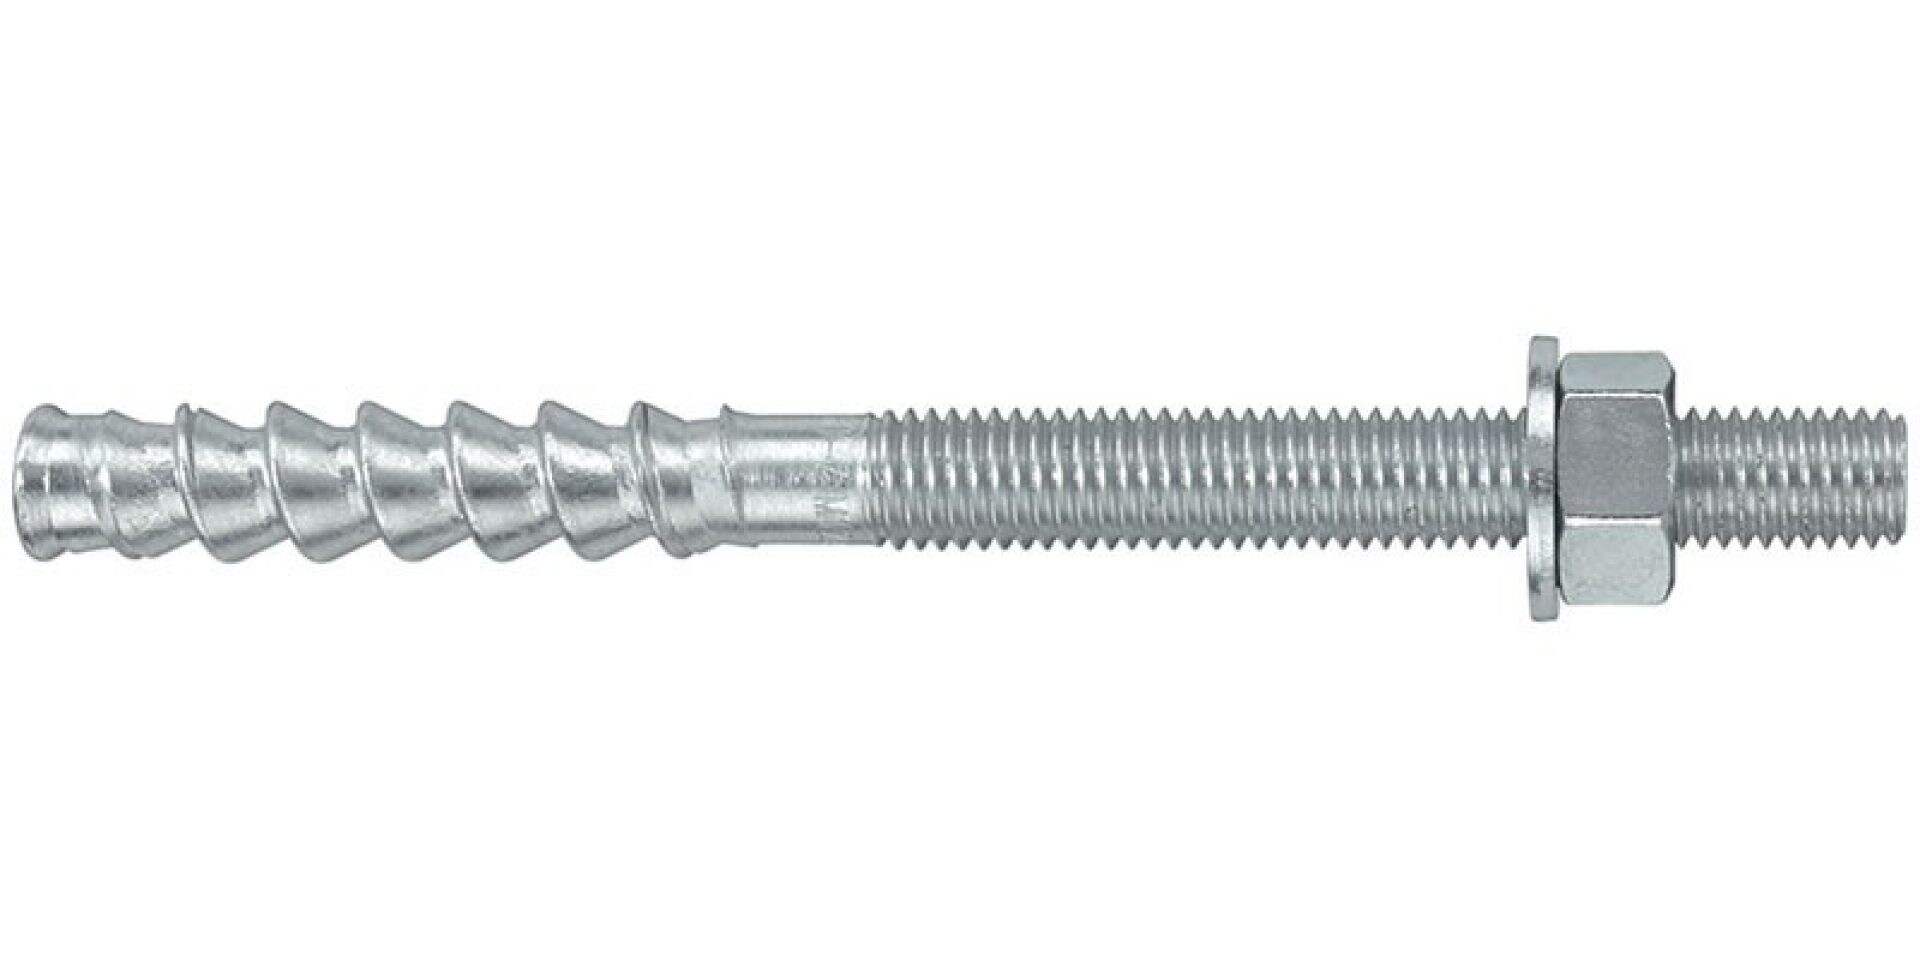 HIT-Z ultimate-performance anchor rod as part of the Hilti SafeSet system 